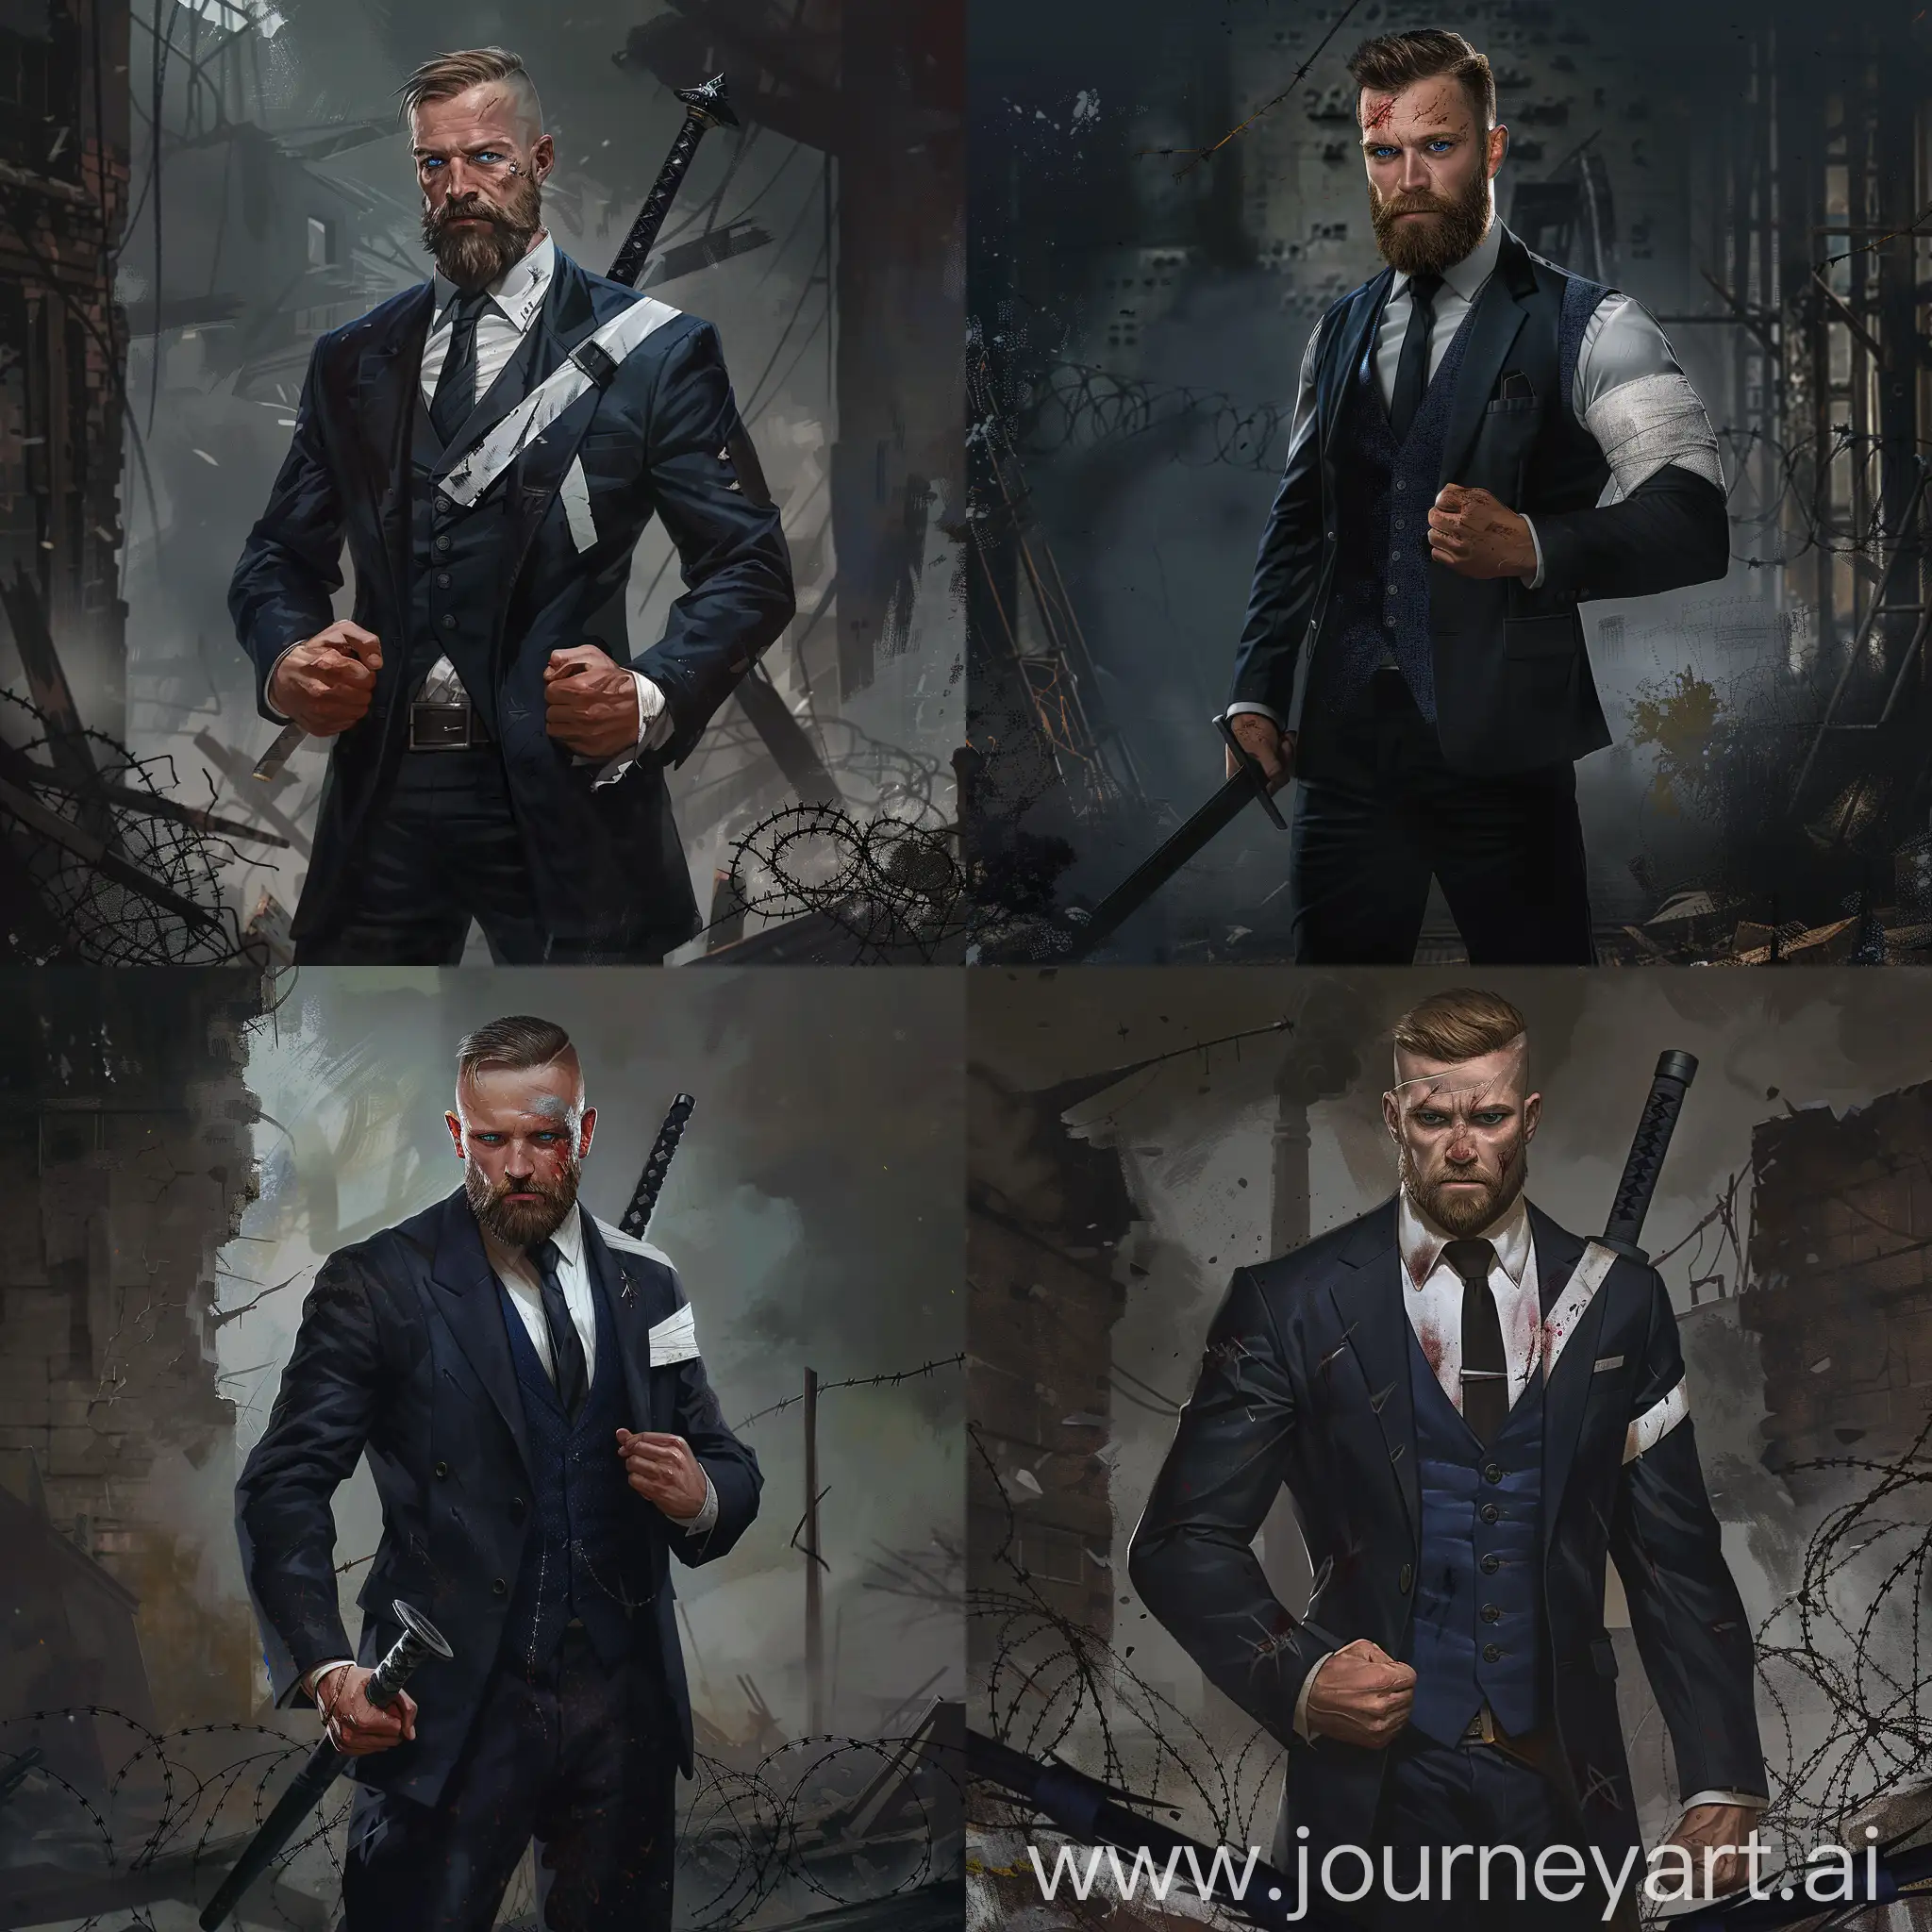 Confident-Man-in-Black-Suit-with-Sword-in-PostApocalyptic-Setting